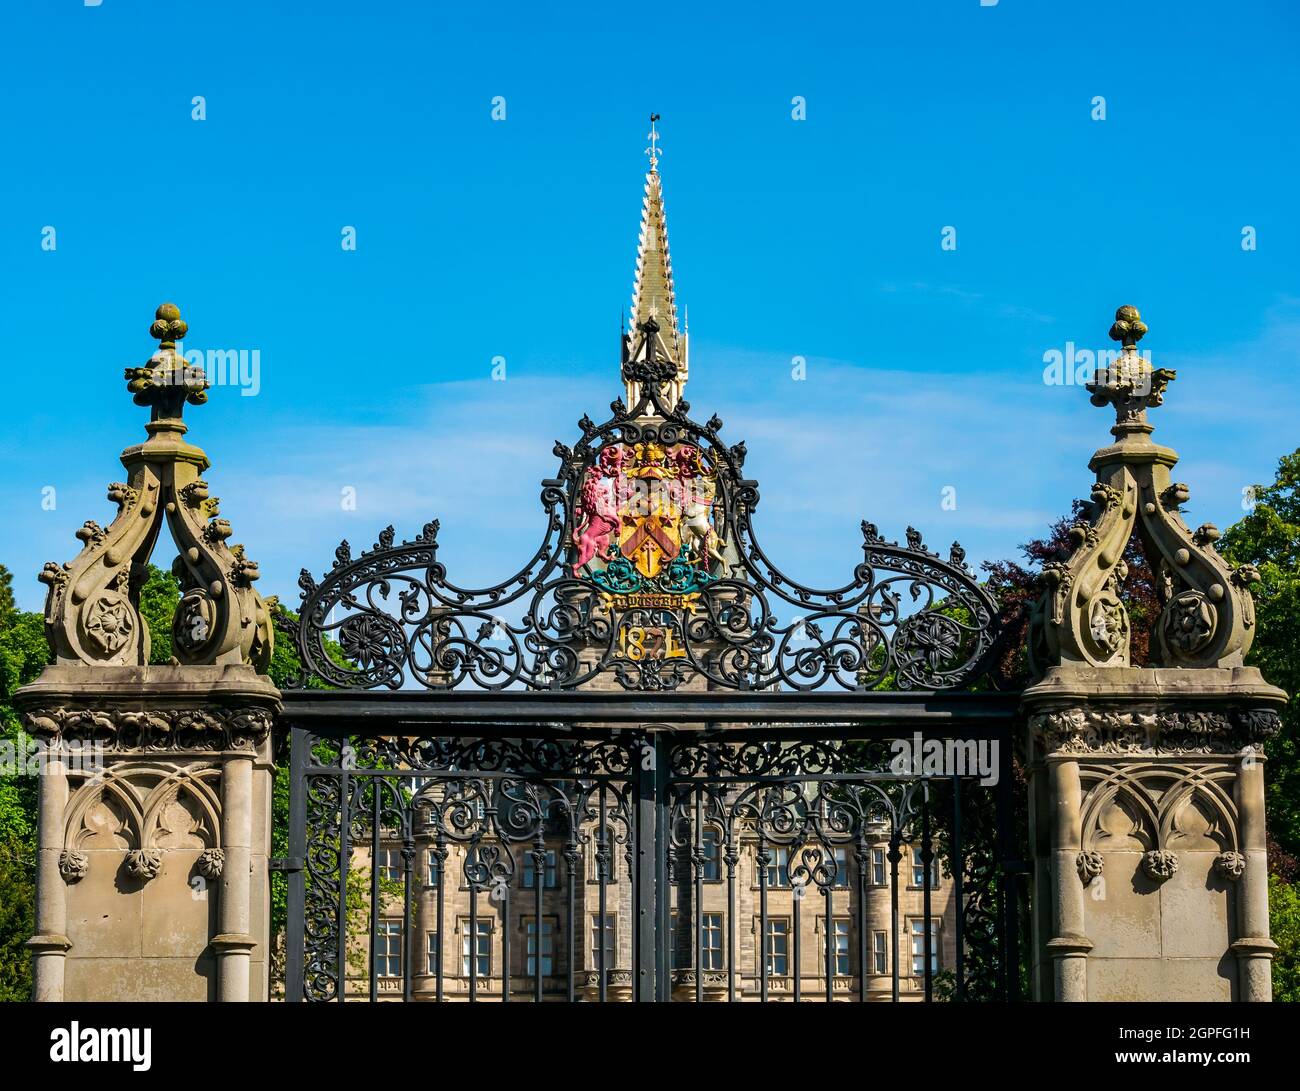 Scots baronial style Fettes College independent school building by David Bryce on sunny day with ornate wrought iron gate, Edinburgh, Scotland, UK Stock Photo